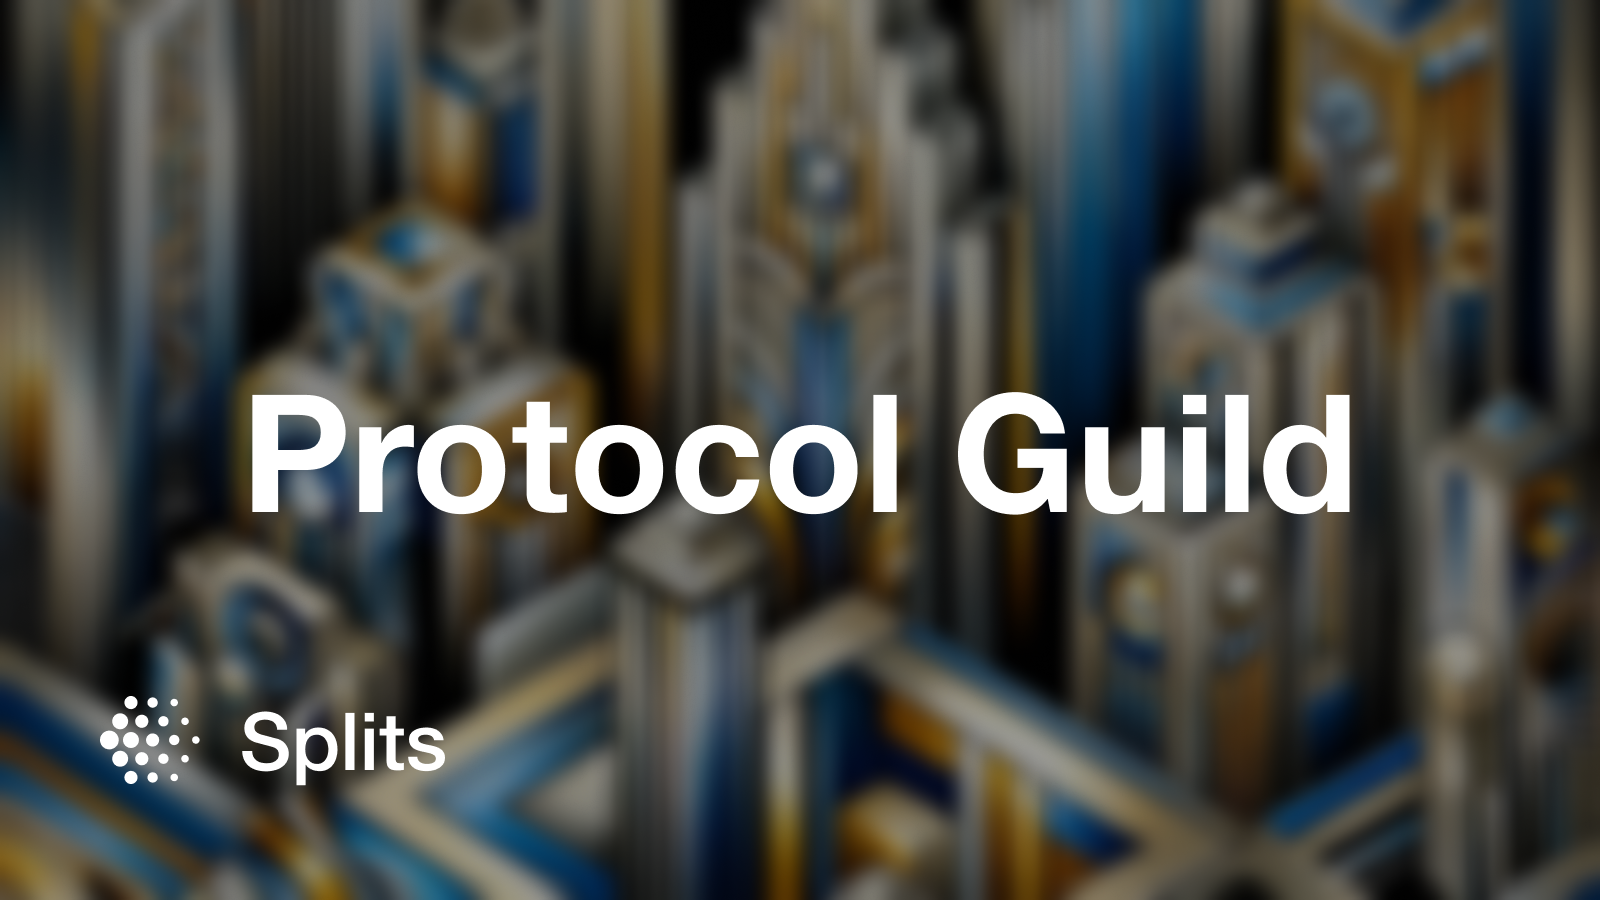 Protocol Guild funds Ethereum core developers using Splits